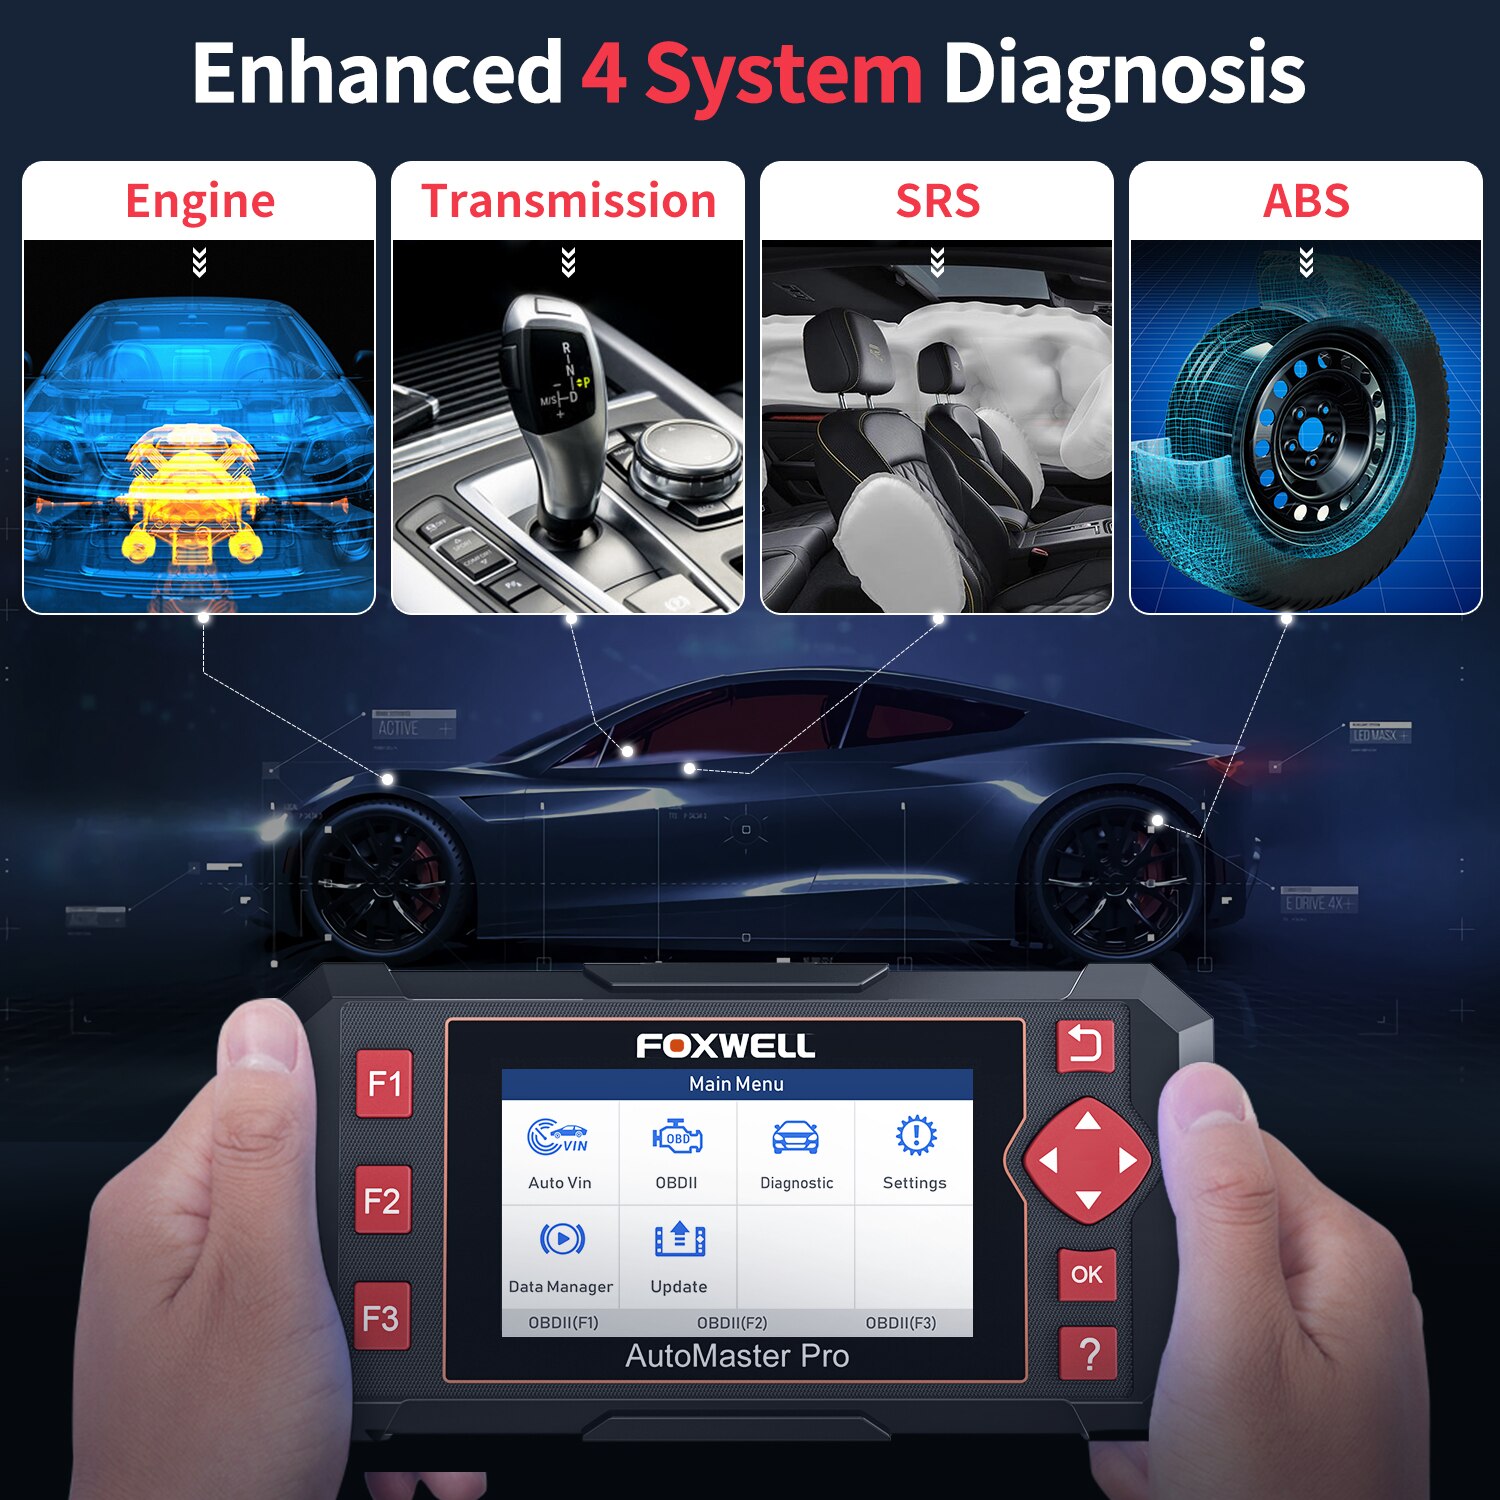 FOXWELL NT604 Elite OBD2 Diagnosis Tool Professional Automotive Scanner ABS Airbag AT Engine Code Reader Car Automotive Tools